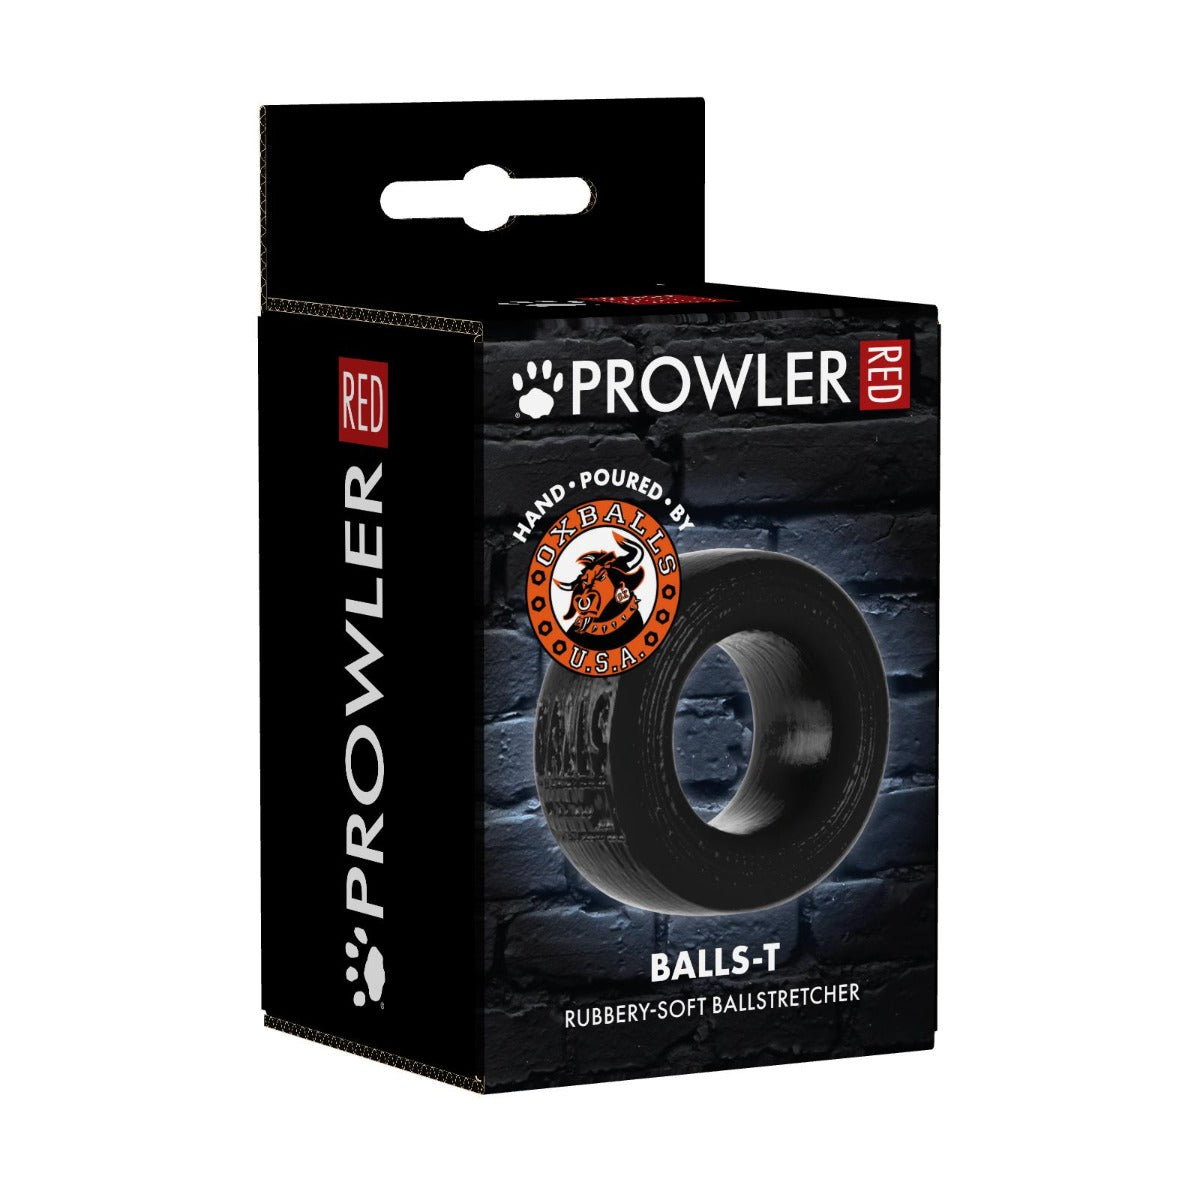 Prowler RED Balls-T By Oxballs (7020759744676)